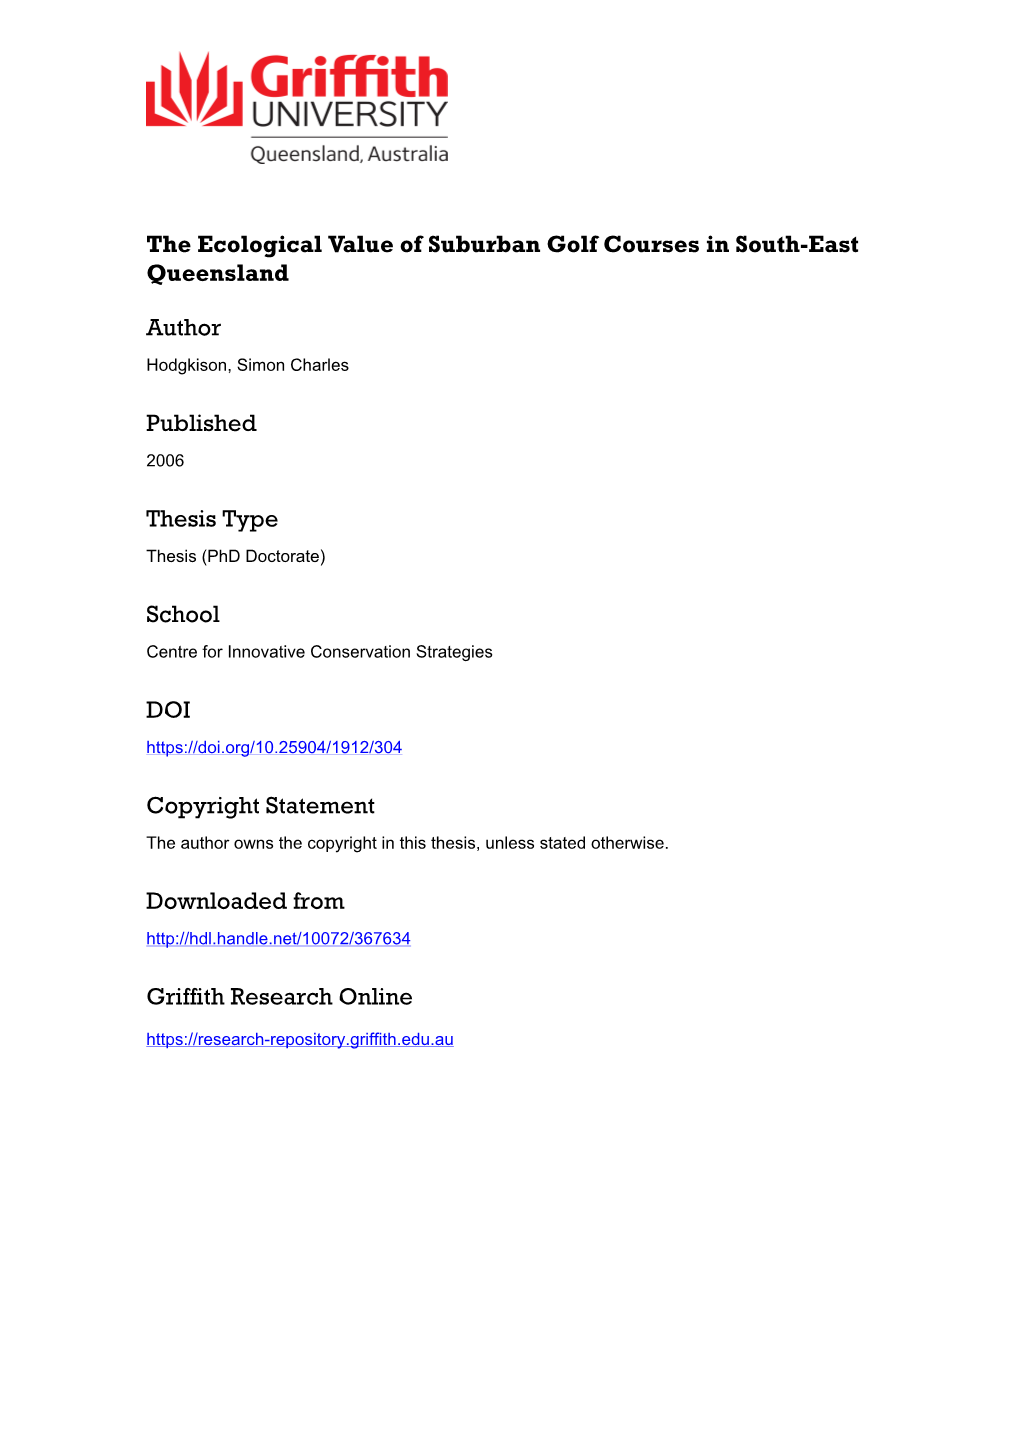 The Ecological Value of Suburban Golf Courses in South-East Queensland